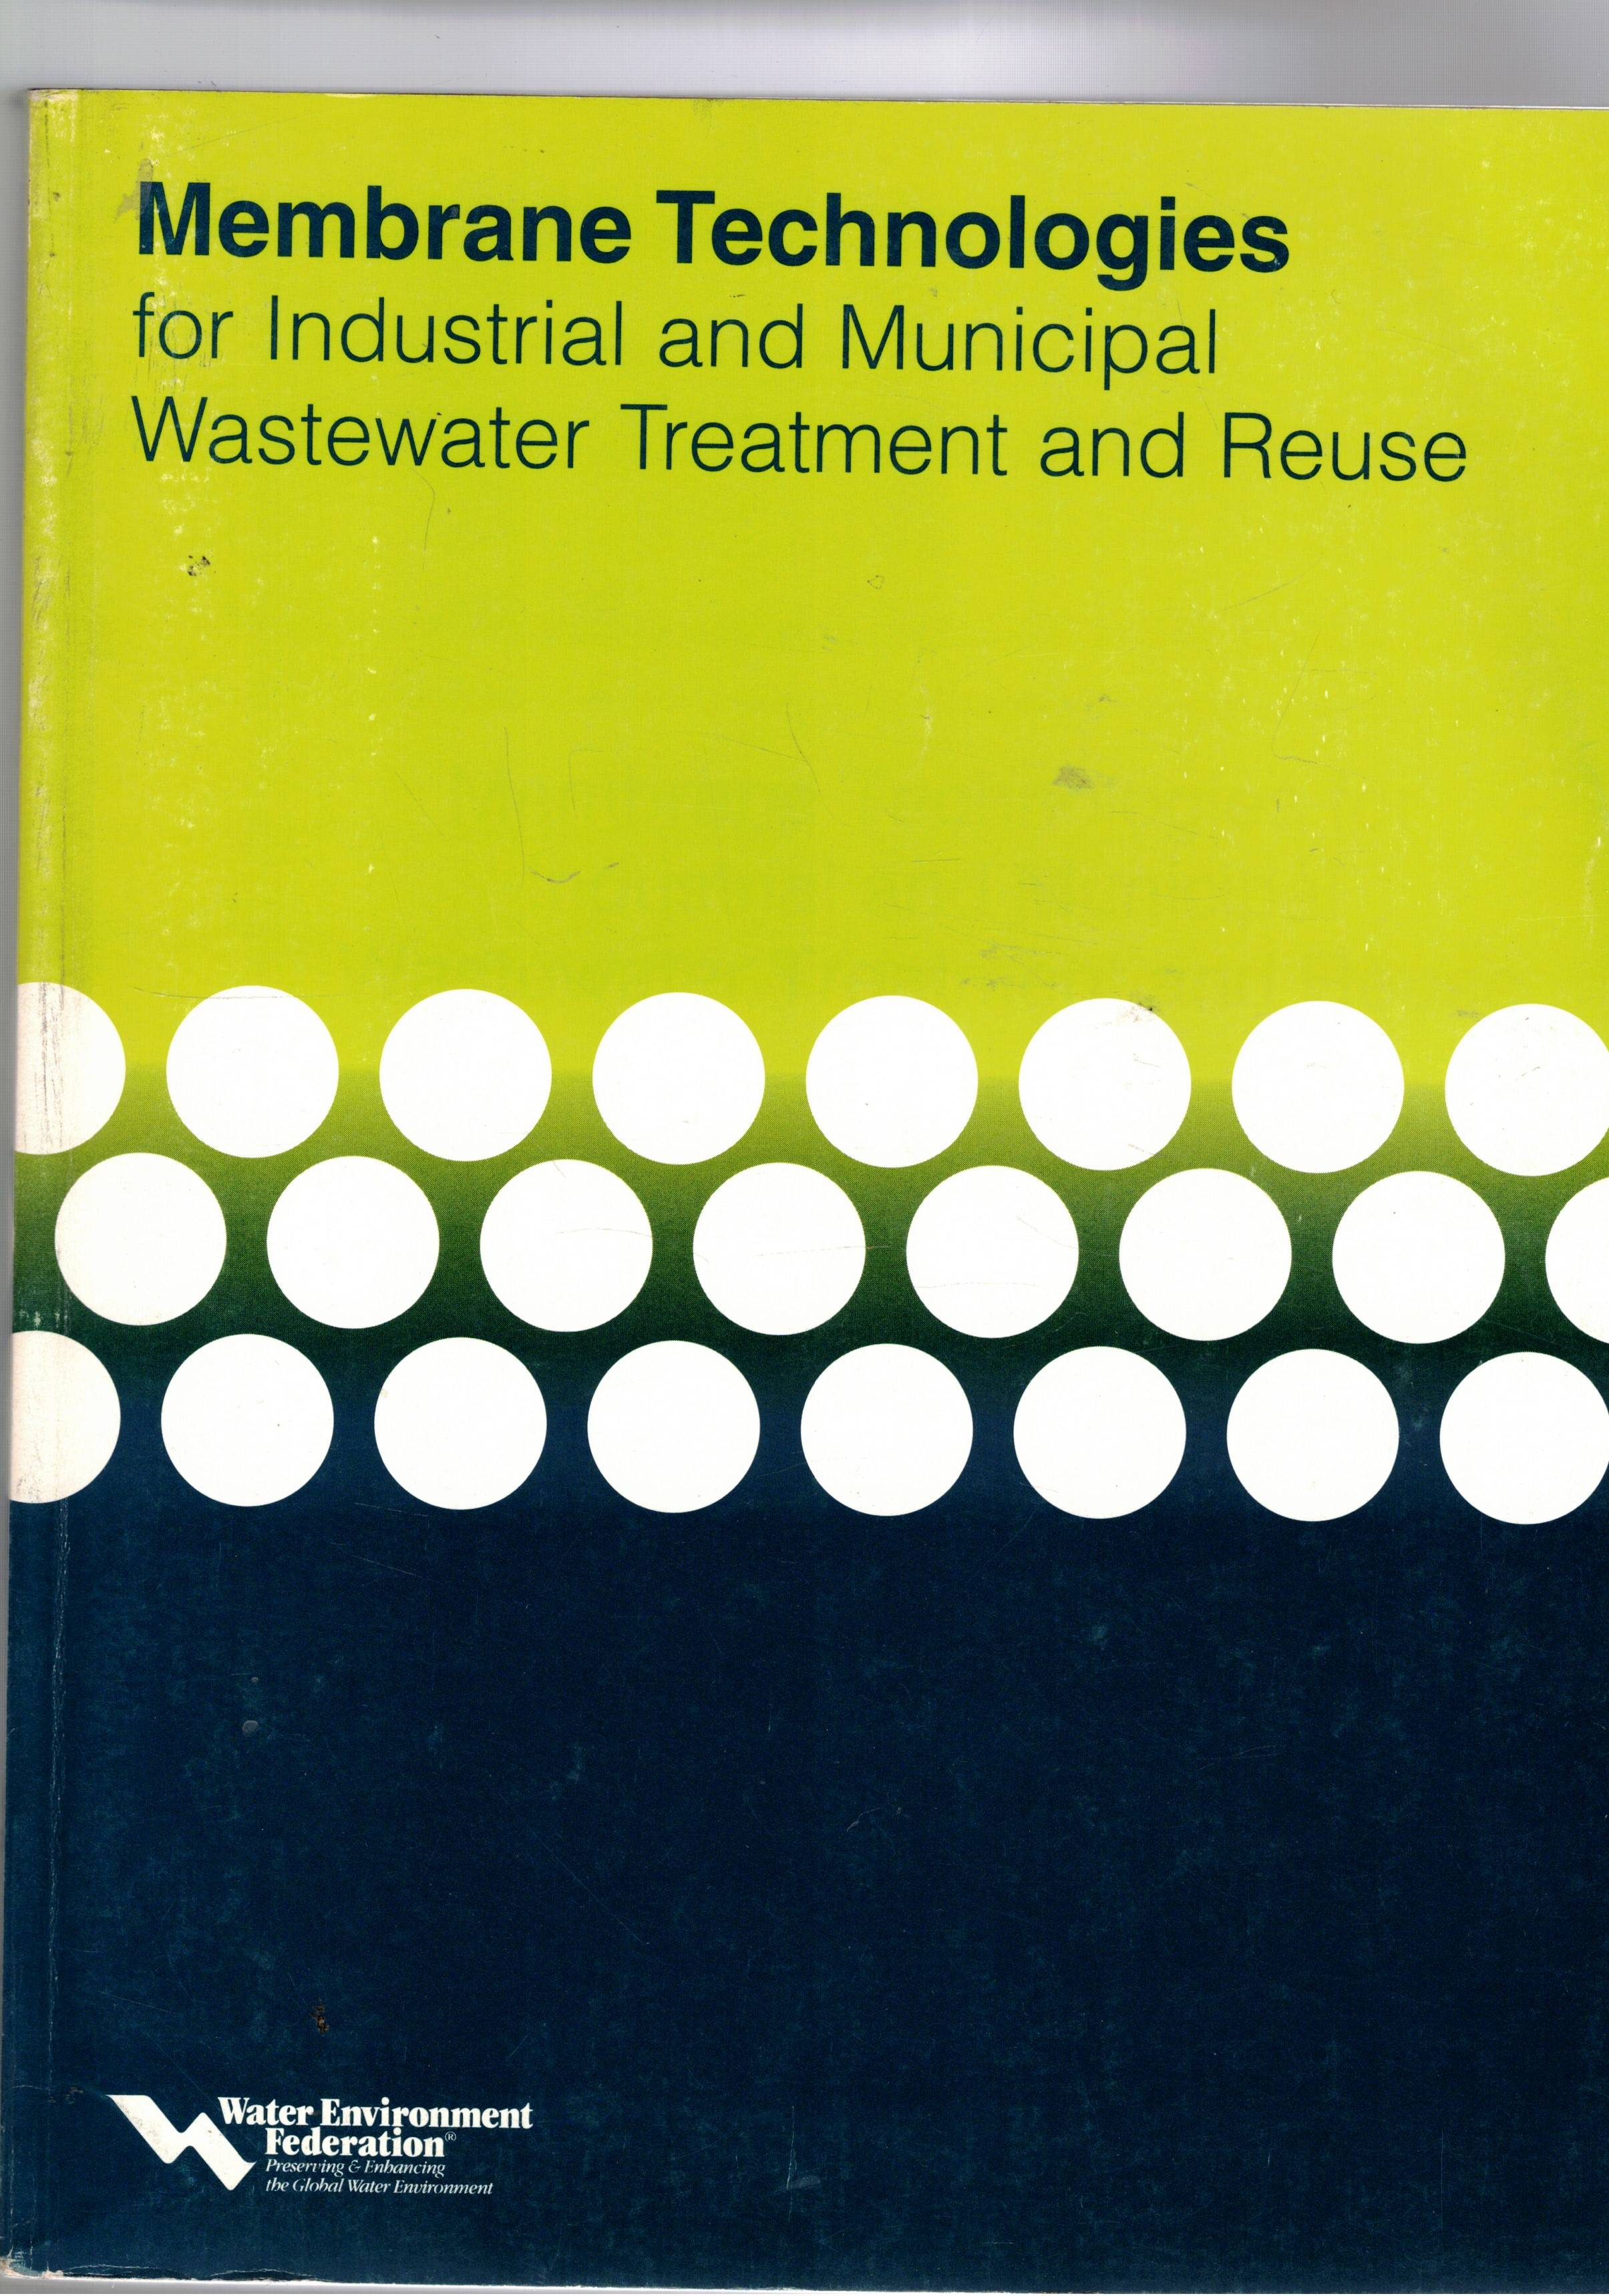 Membrane Technologies for Industrial and Municipal Wastewater Treatment and Reuse.